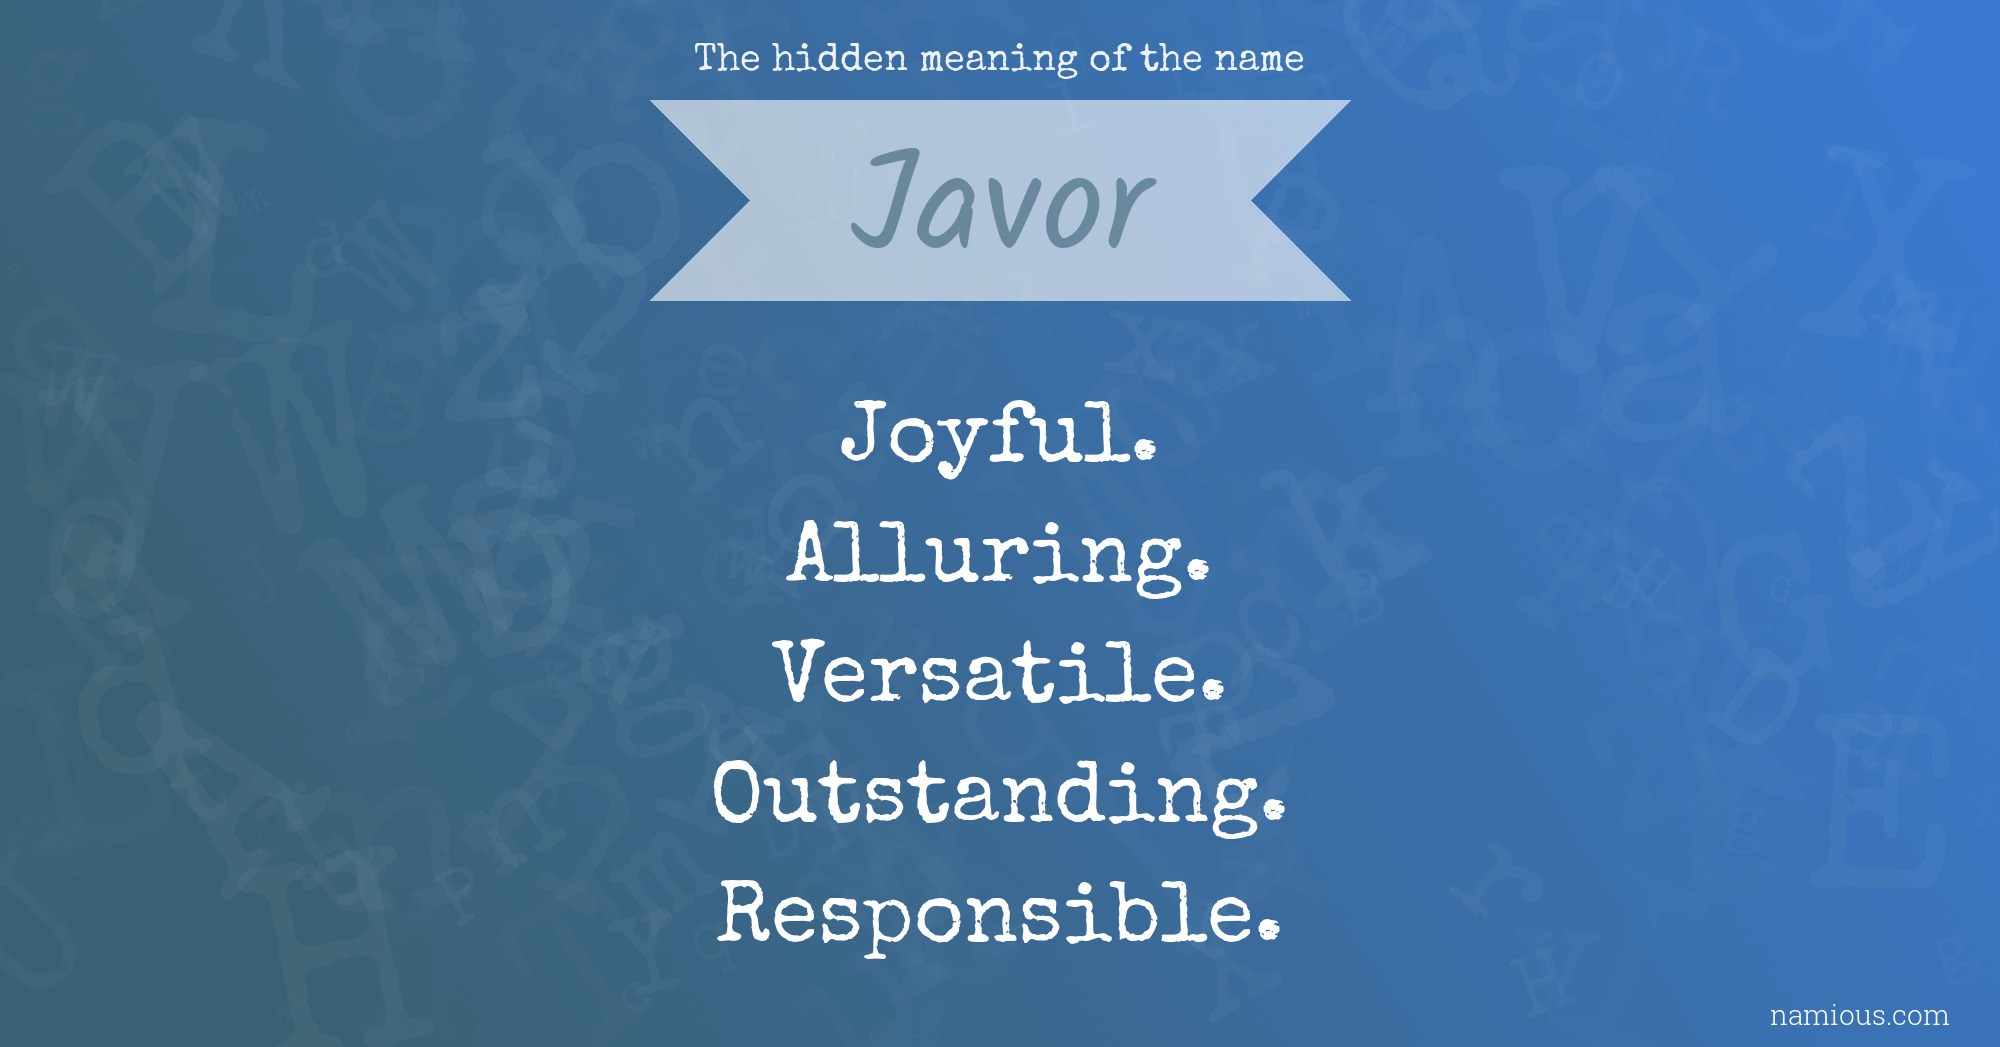 The hidden meaning of the name Javor